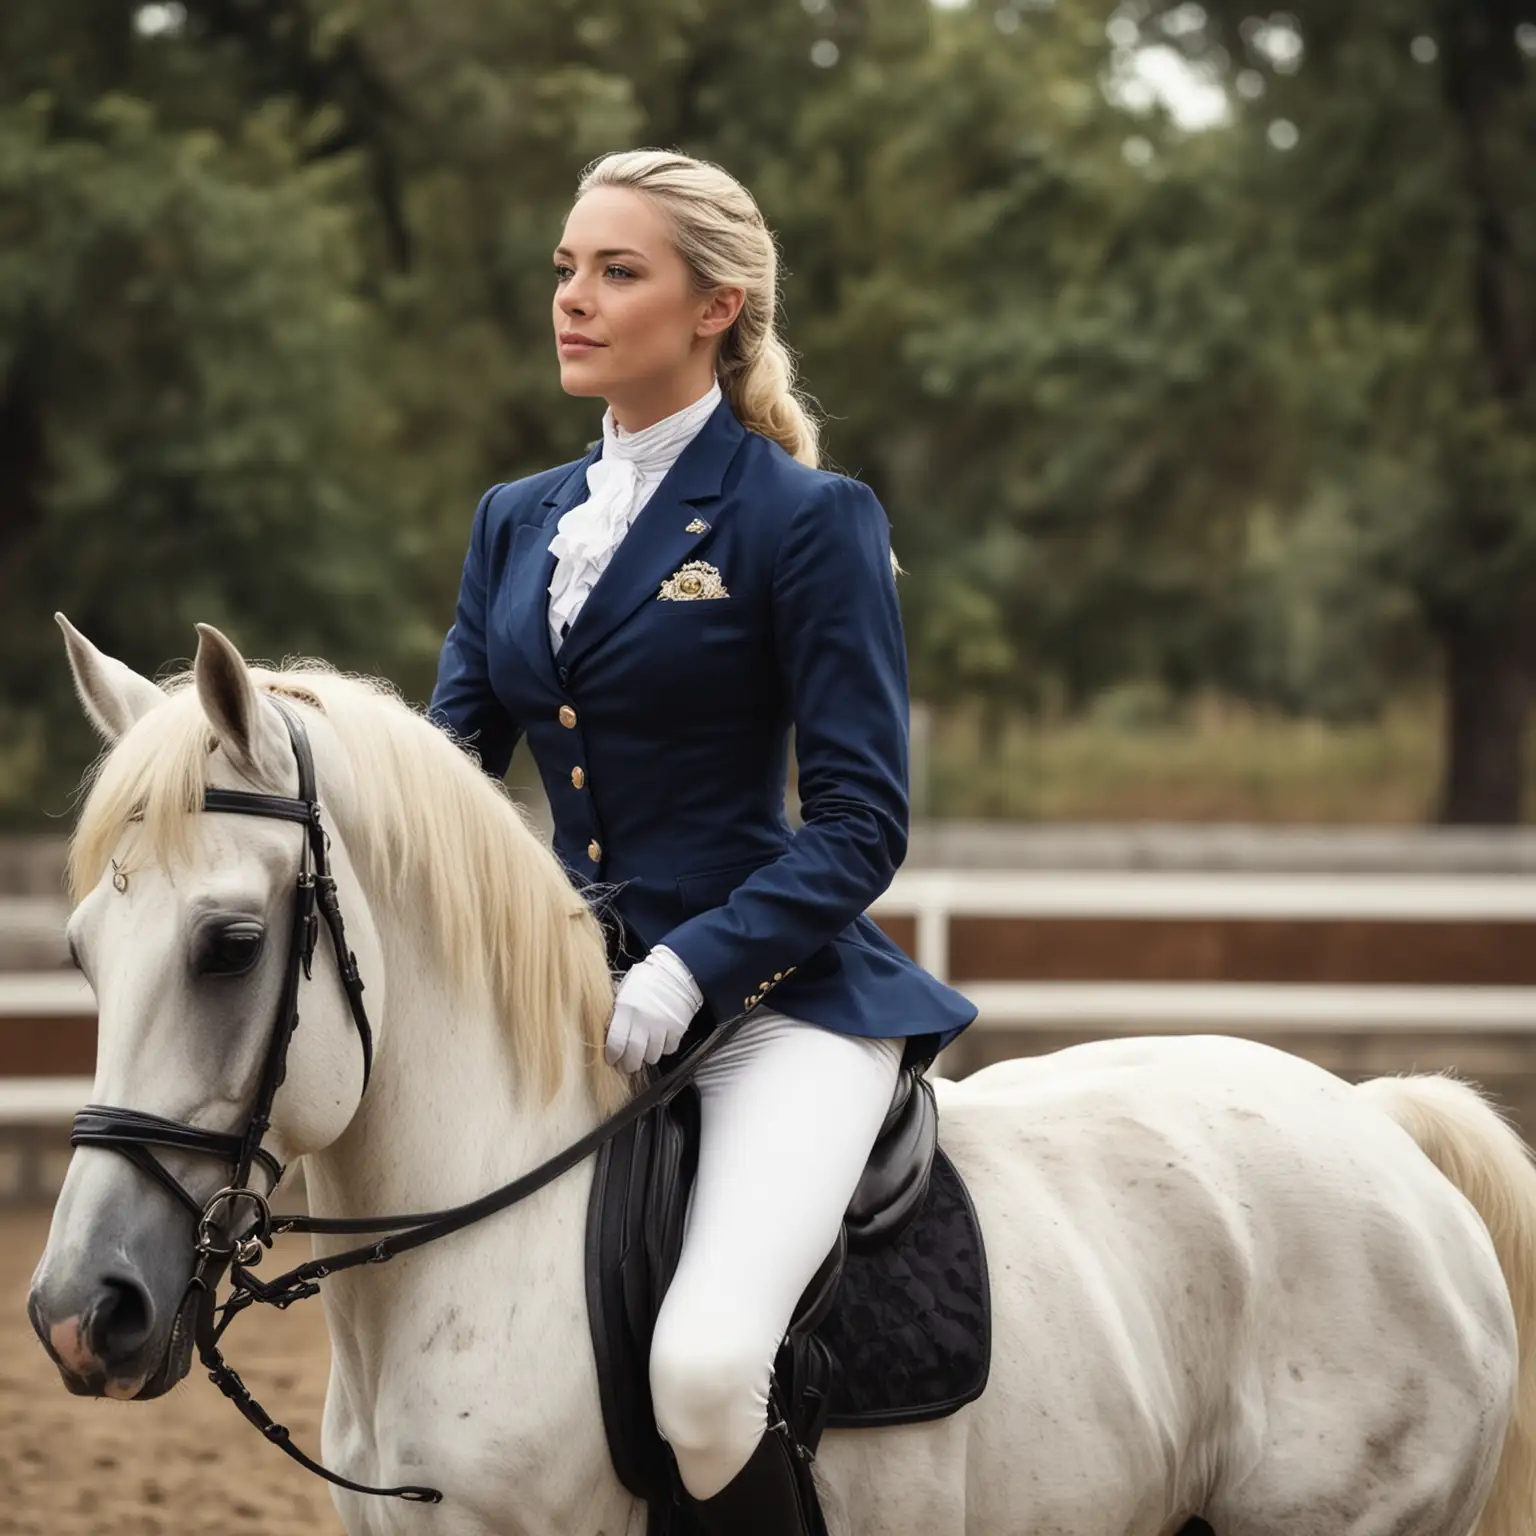 Aristocrat with Blue Beard and Blonde Woman in Dressage Attire Riding Horses